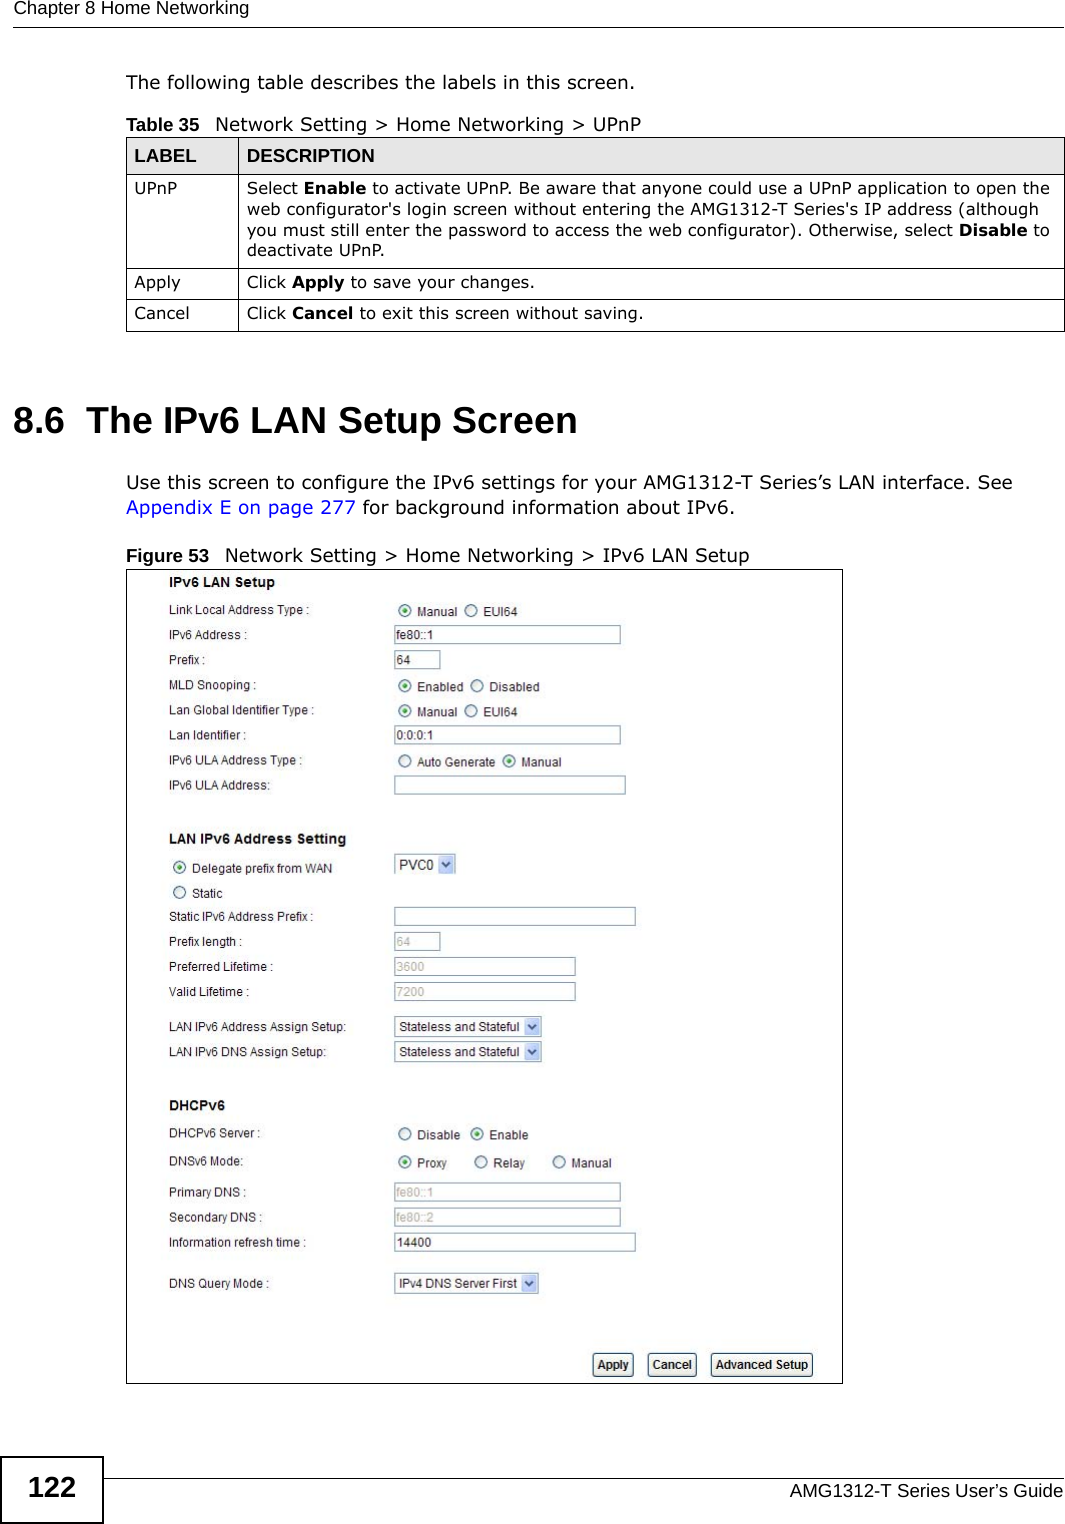 Chapter 8 Home NetworkingAMG1312-T Series User’s Guide122The following table describes the labels in this screen.8.6  The IPv6 LAN Setup ScreenUse this screen to configure the IPv6 settings for your AMG1312-T Series’s LAN interface. See Appendix E on page 277 for background information about IPv6. Figure 53   Network Setting &gt; Home Networking &gt; IPv6 LAN Setup Table 35   Network Setting &gt; Home Networking &gt; UPnPLABEL DESCRIPTIONUPnP Select Enable to activate UPnP. Be aware that anyone could use a UPnP application to open the web configurator&apos;s login screen without entering the AMG1312-T Series&apos;s IP address (although you must still enter the password to access the web configurator). Otherwise, select Disable to deactivate UPnP.Apply Click Apply to save your changes.Cancel Click Cancel to exit this screen without saving.